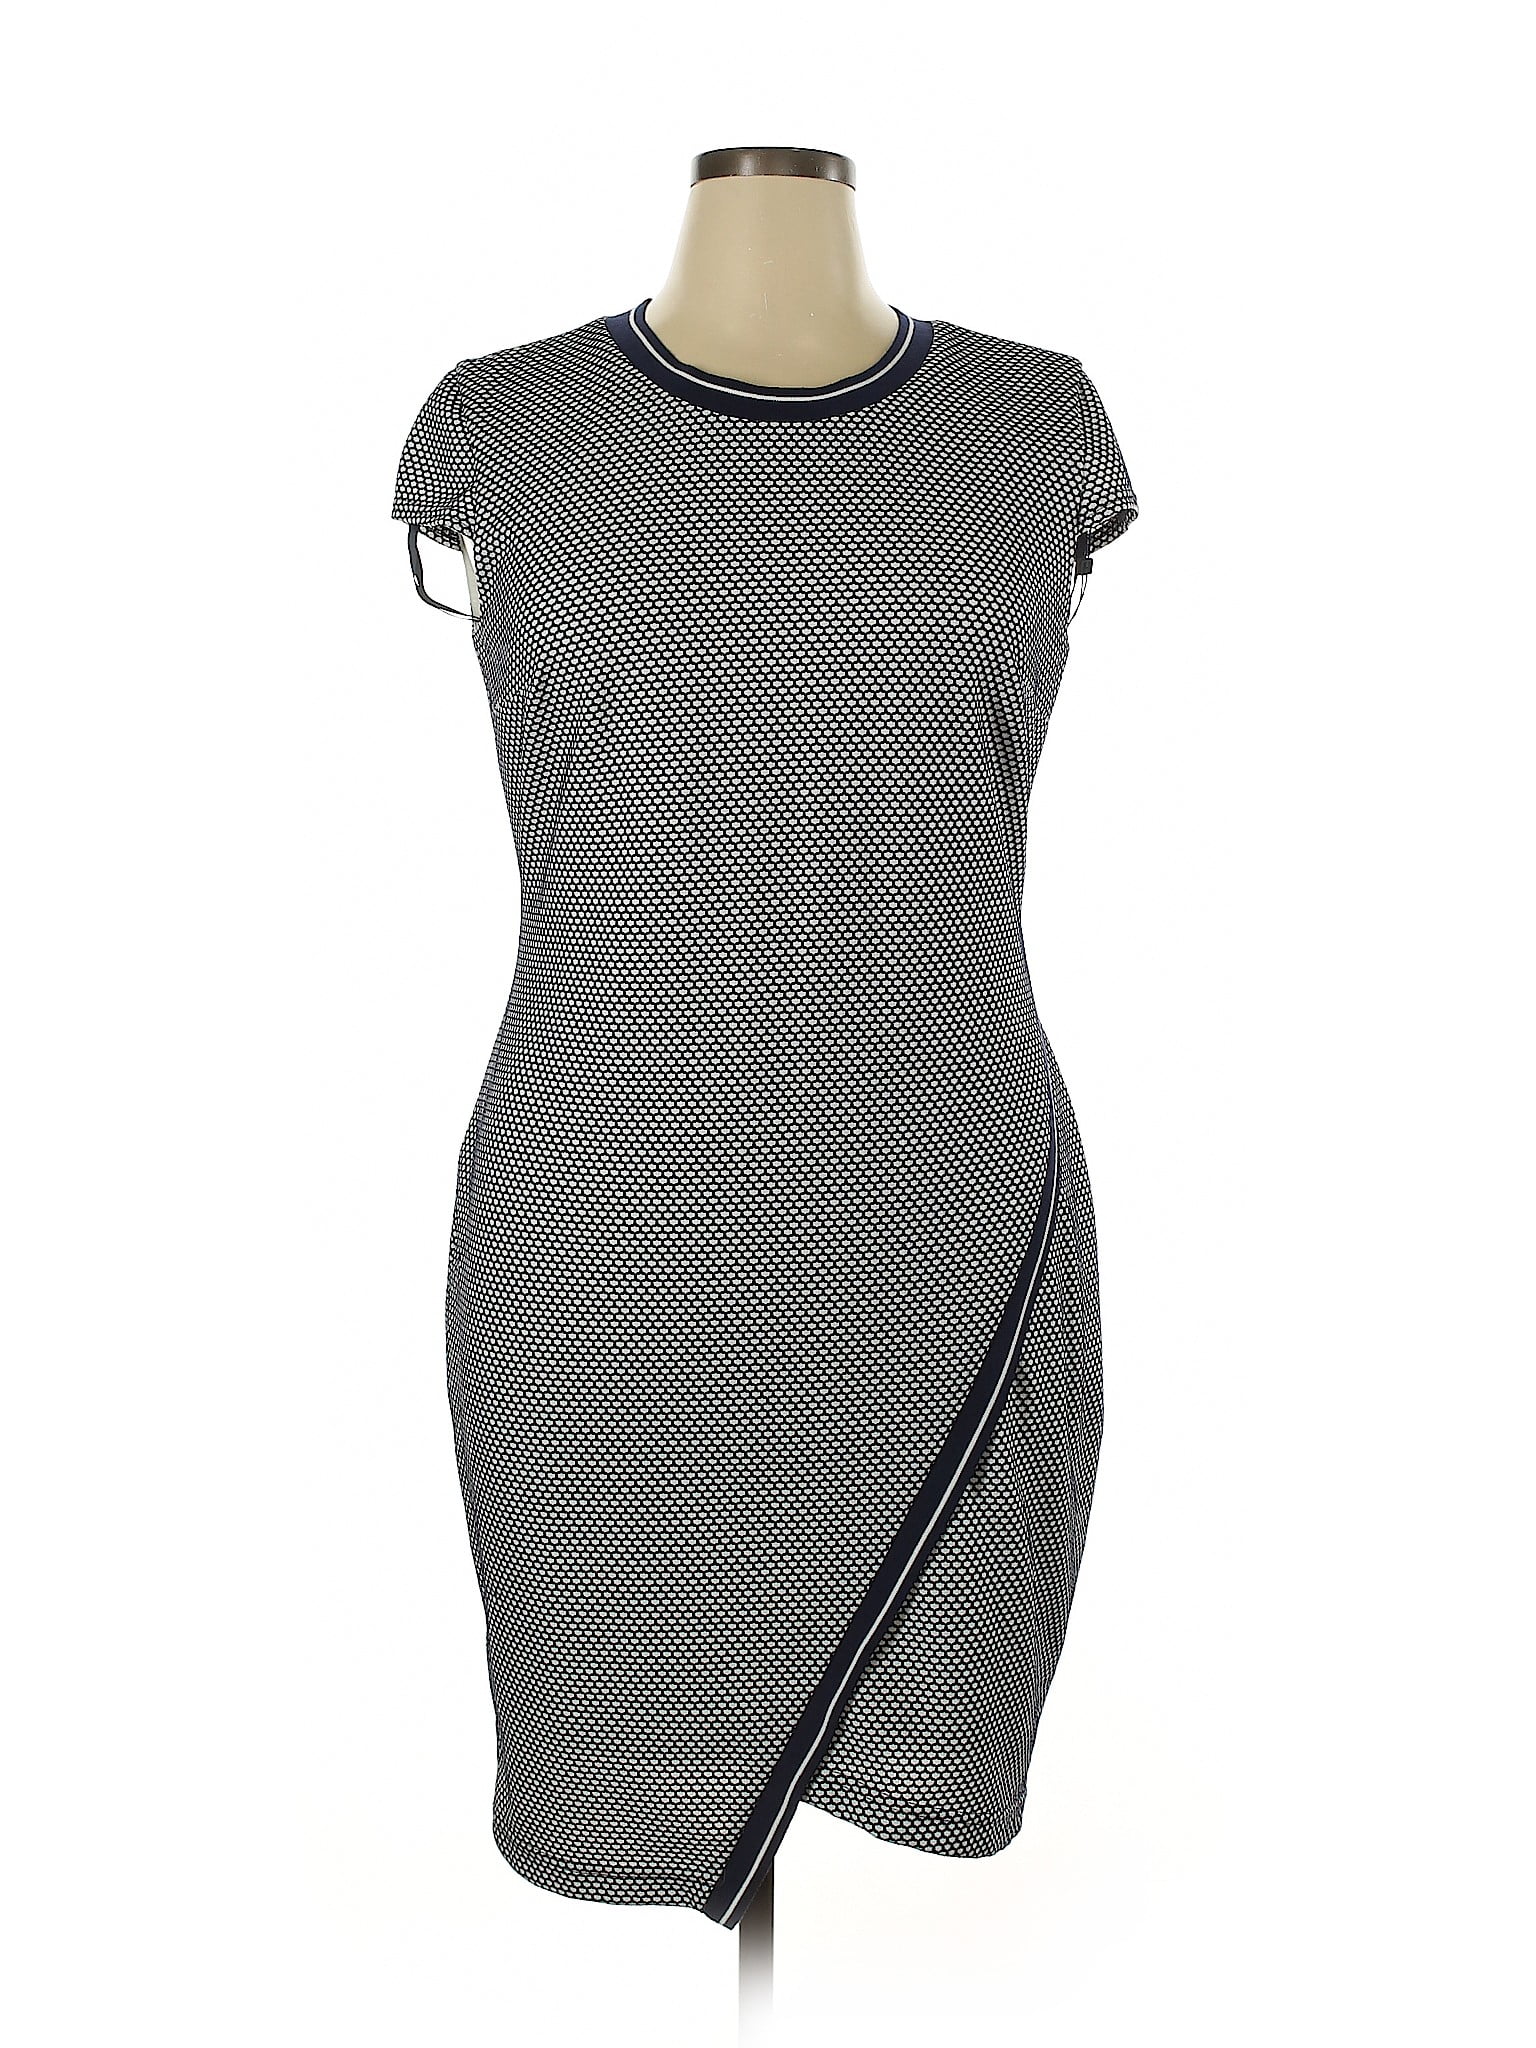 Tommy Hilfiger - Pre-Owned Tommy Hilfiger Women's Size 14 Casual Dress ...